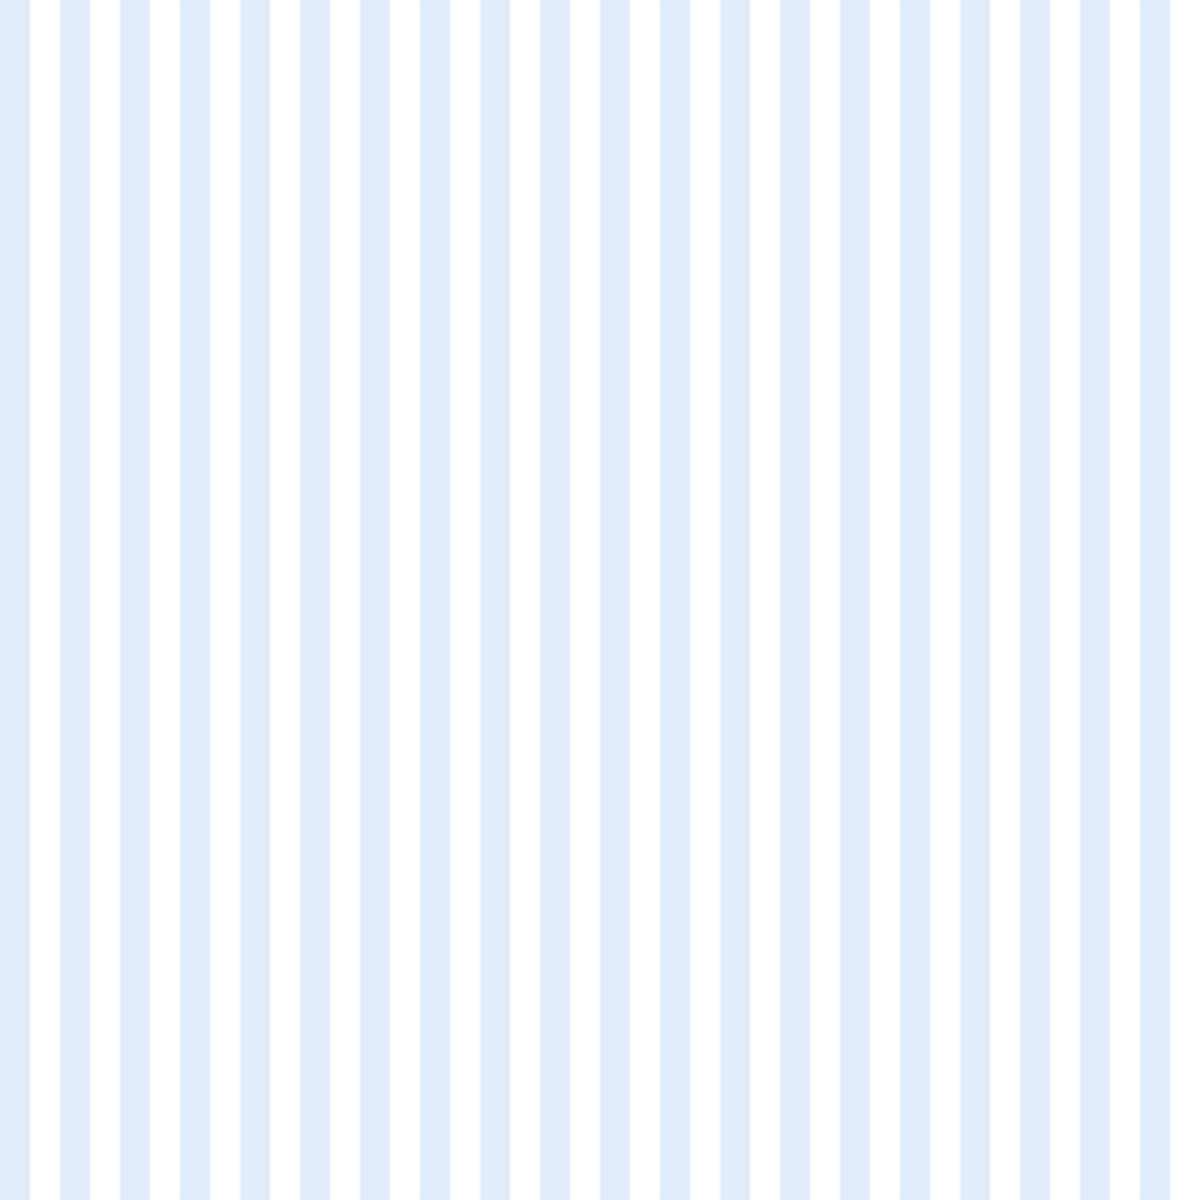 Tumblr Backgrounds White And Blue